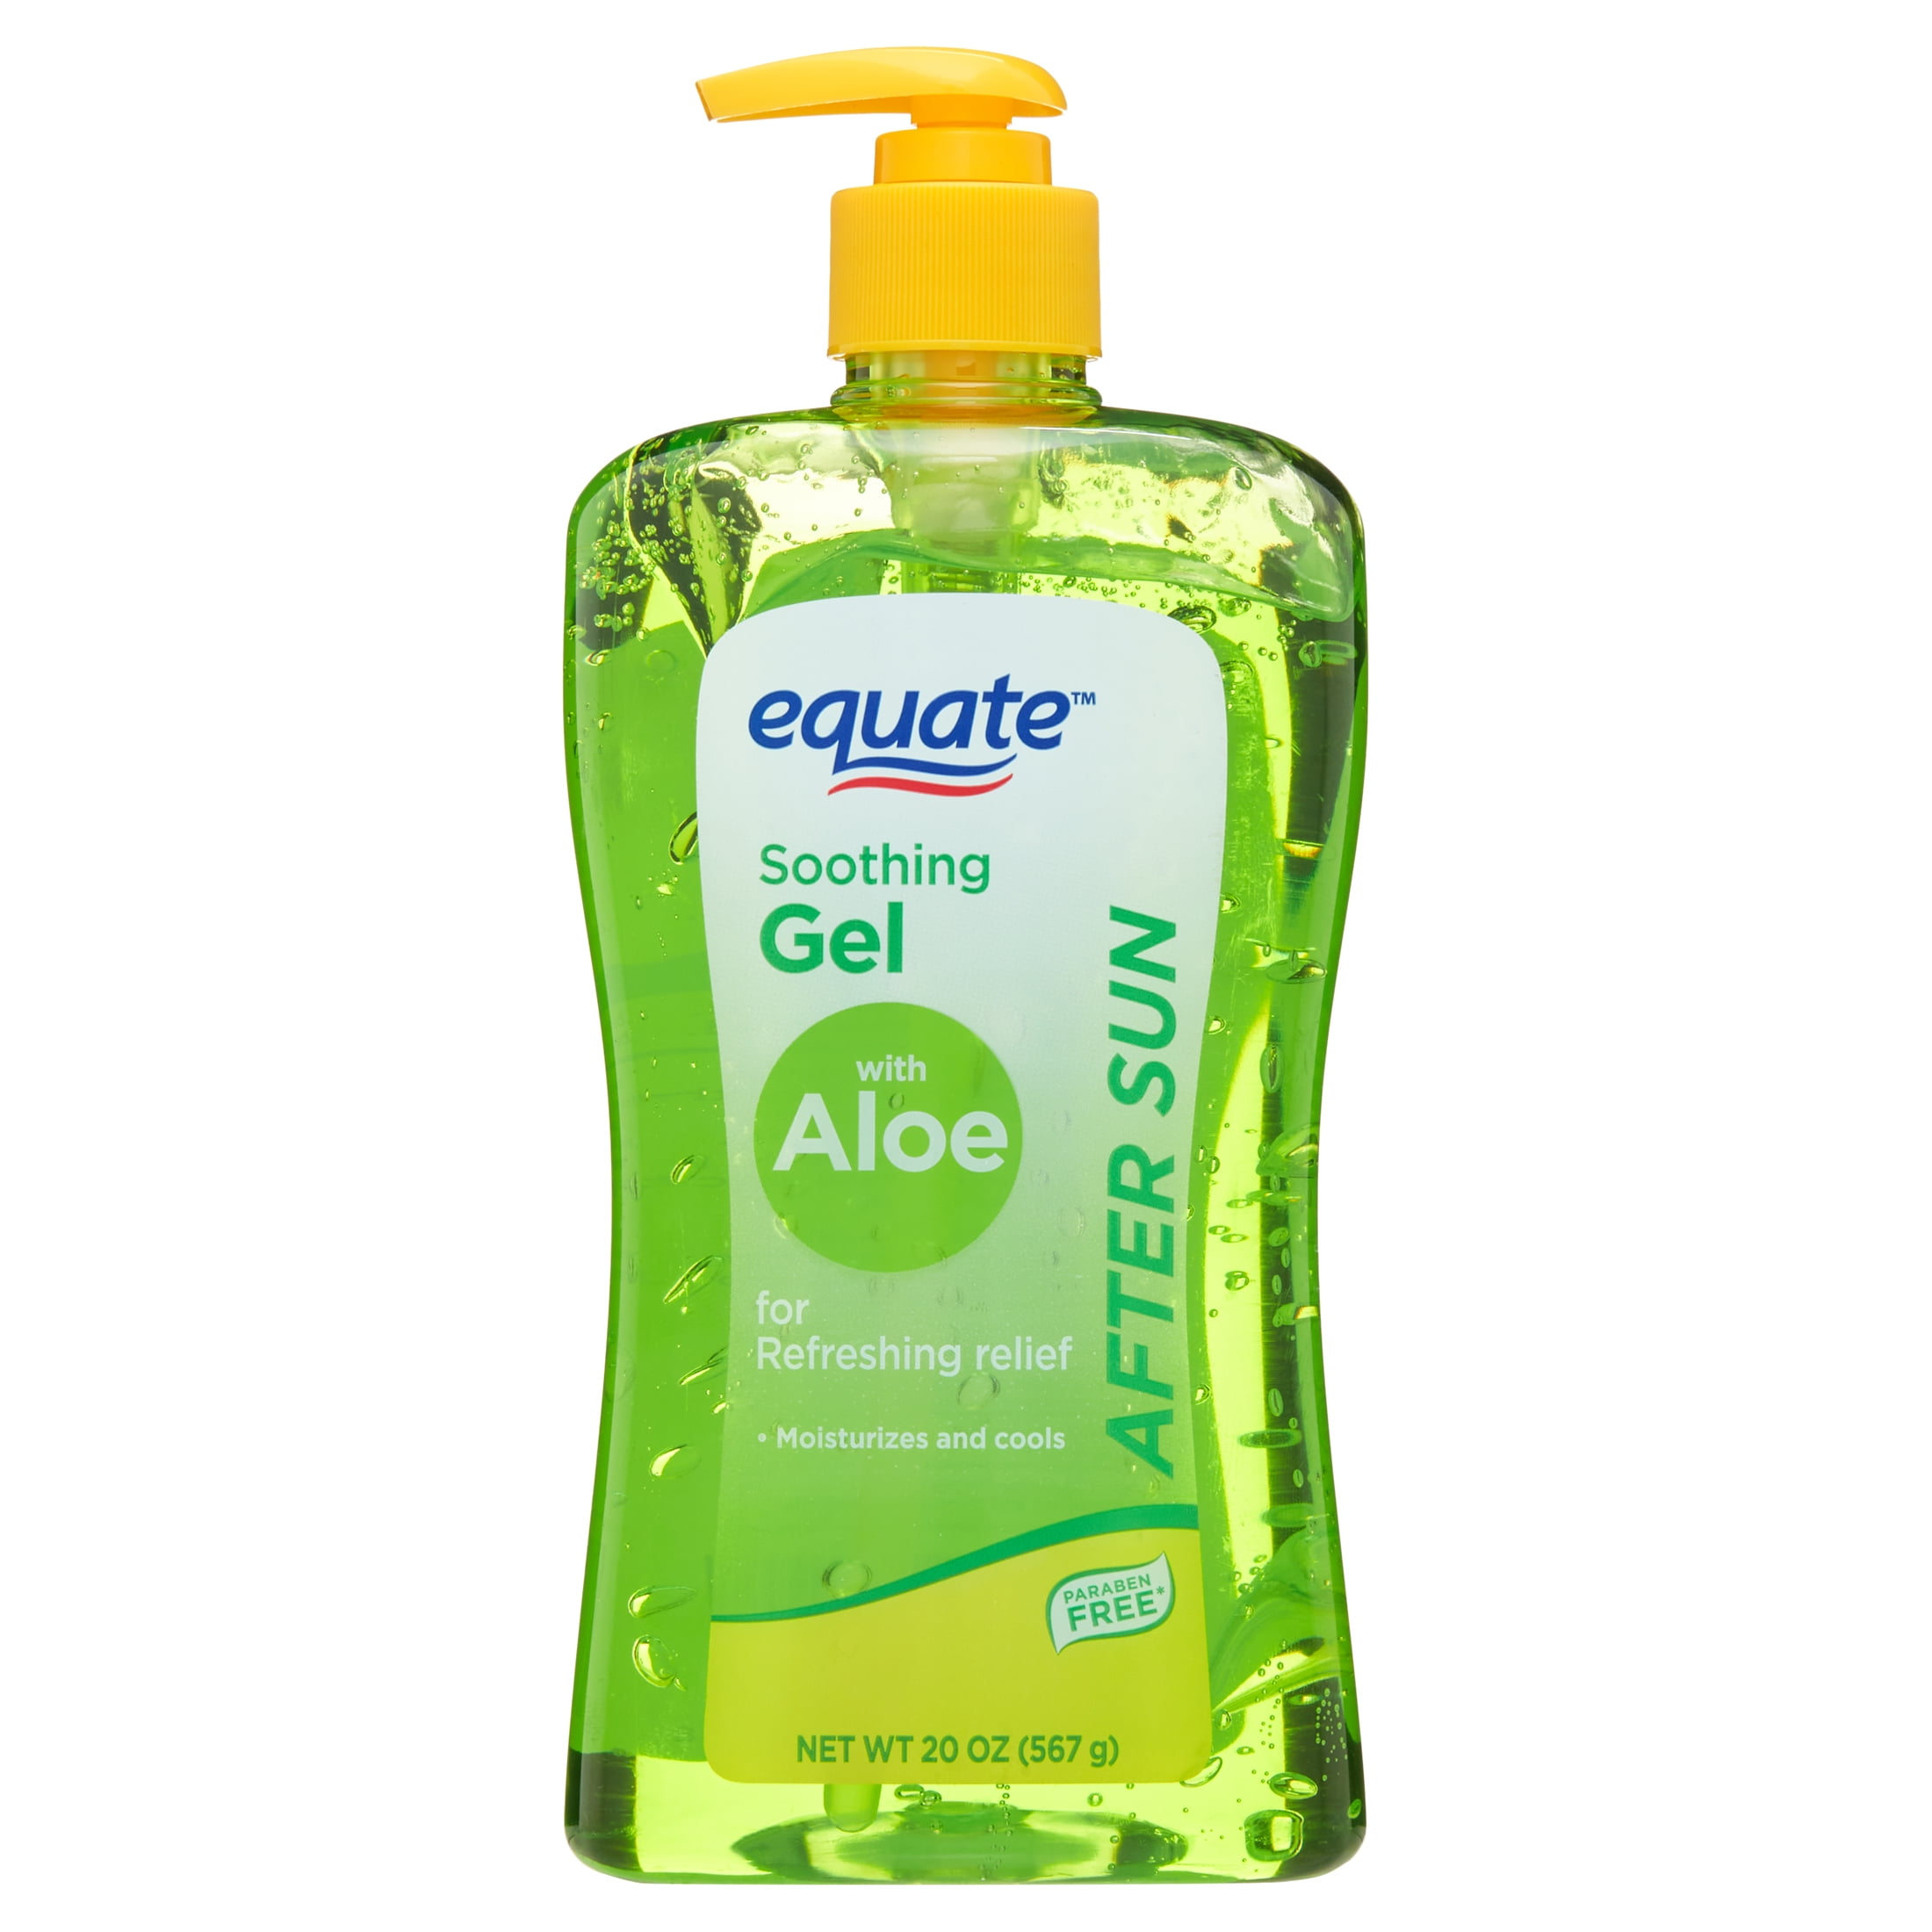 Equate After Sun Soothing Gel With Aloe, 20 oz